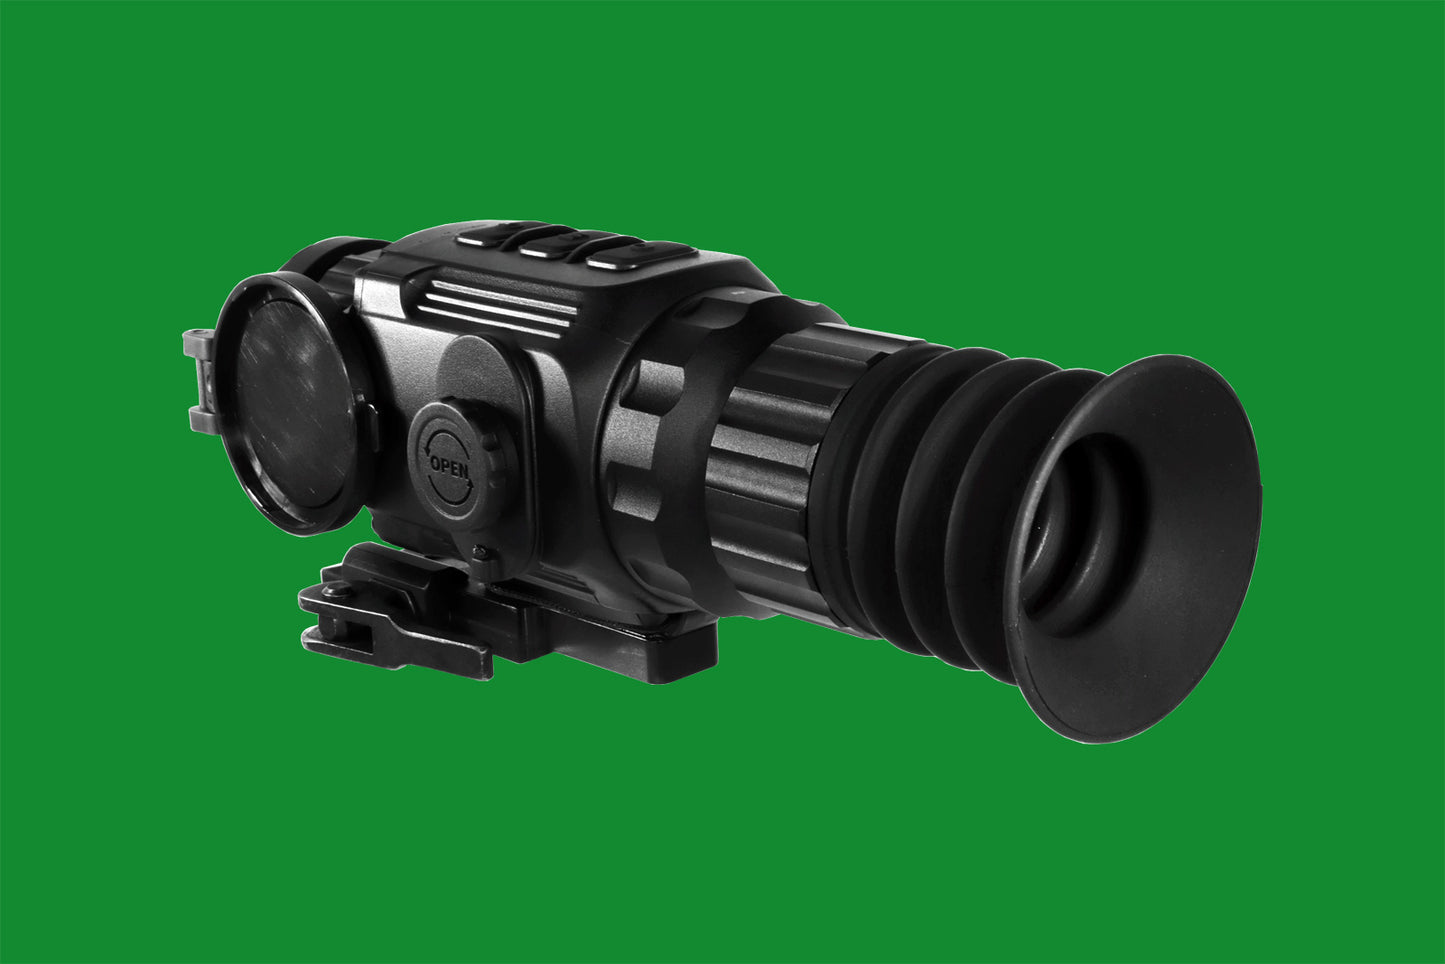 HOGSTER STIMULUS™ 2.3-4.6x19 VOx THERMAL SIGHT